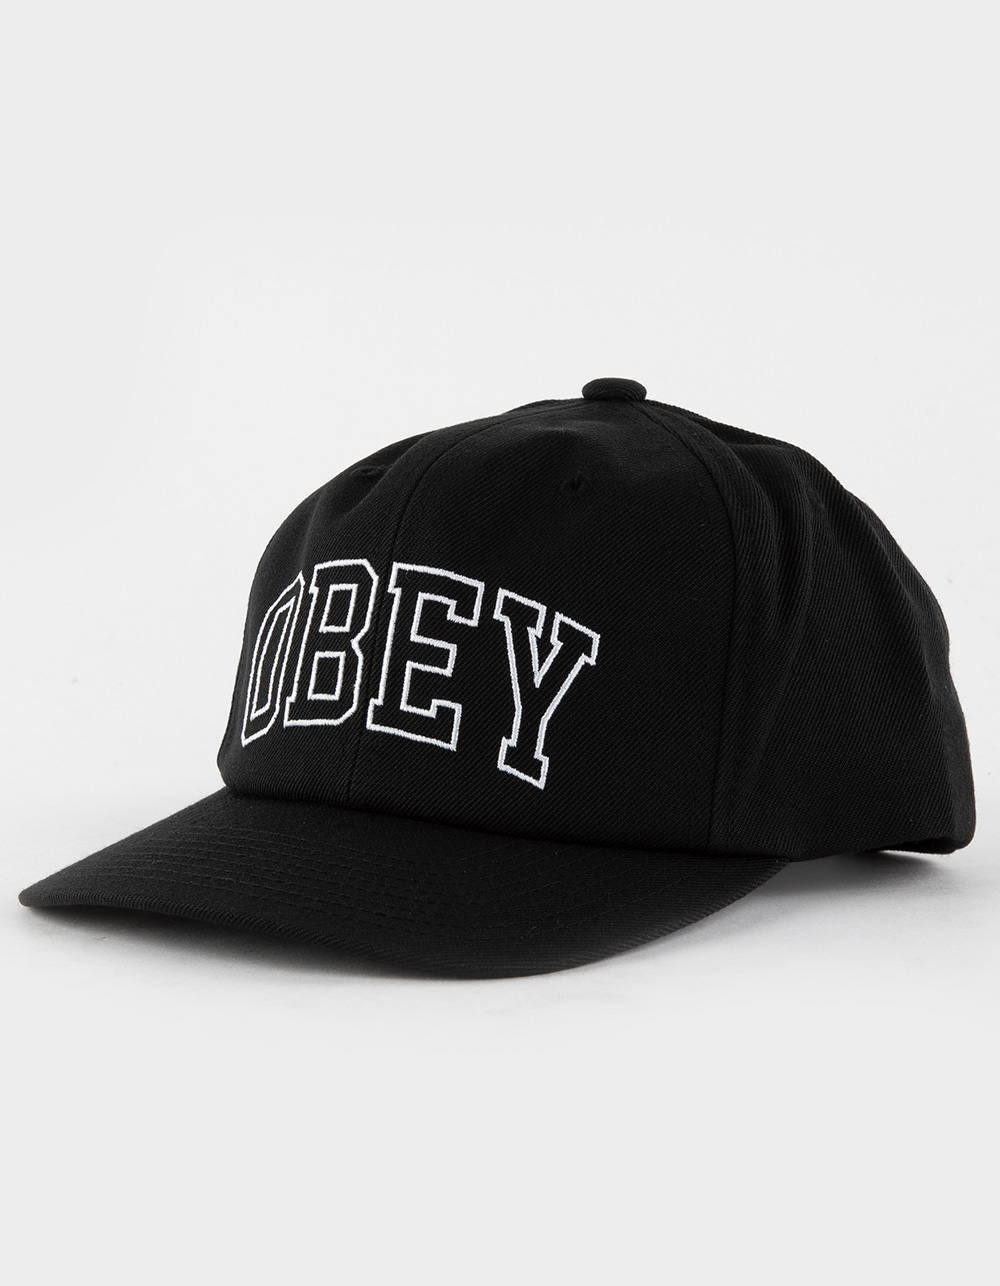 Obey Academy 6 Panel Snapback Hat in Black